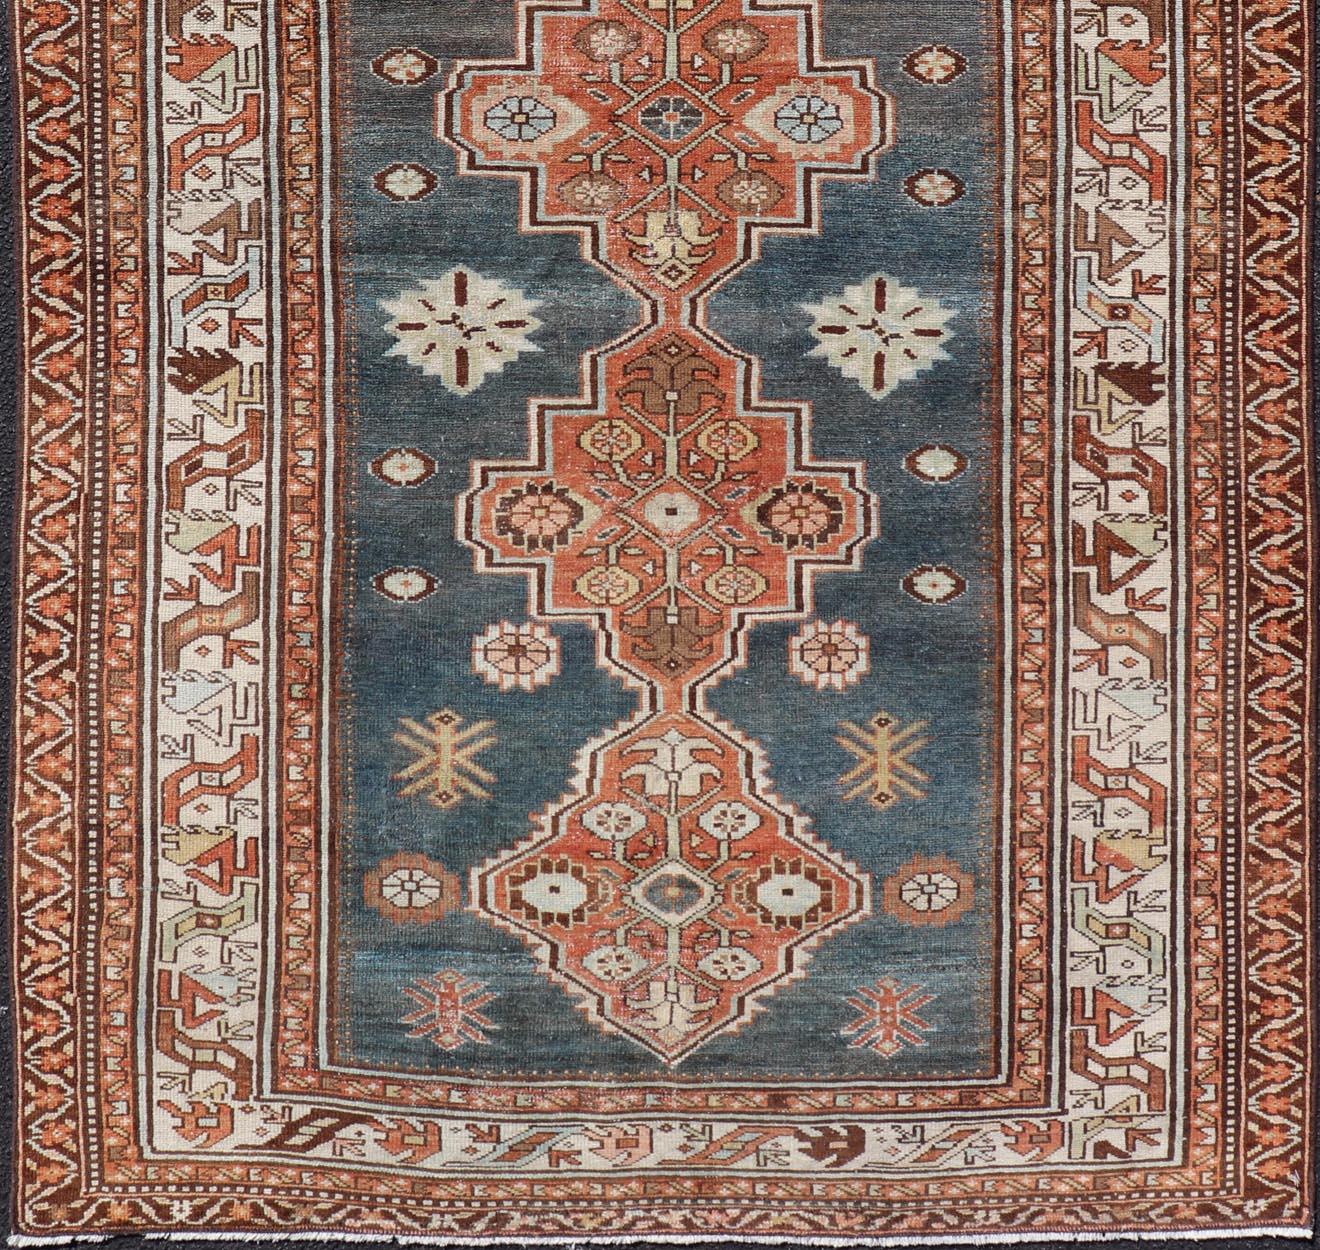 Antique Persian Hamadan Rug with Central Sub-Geometric Medallion in Blue-Gray In Good Condition For Sale In Atlanta, GA